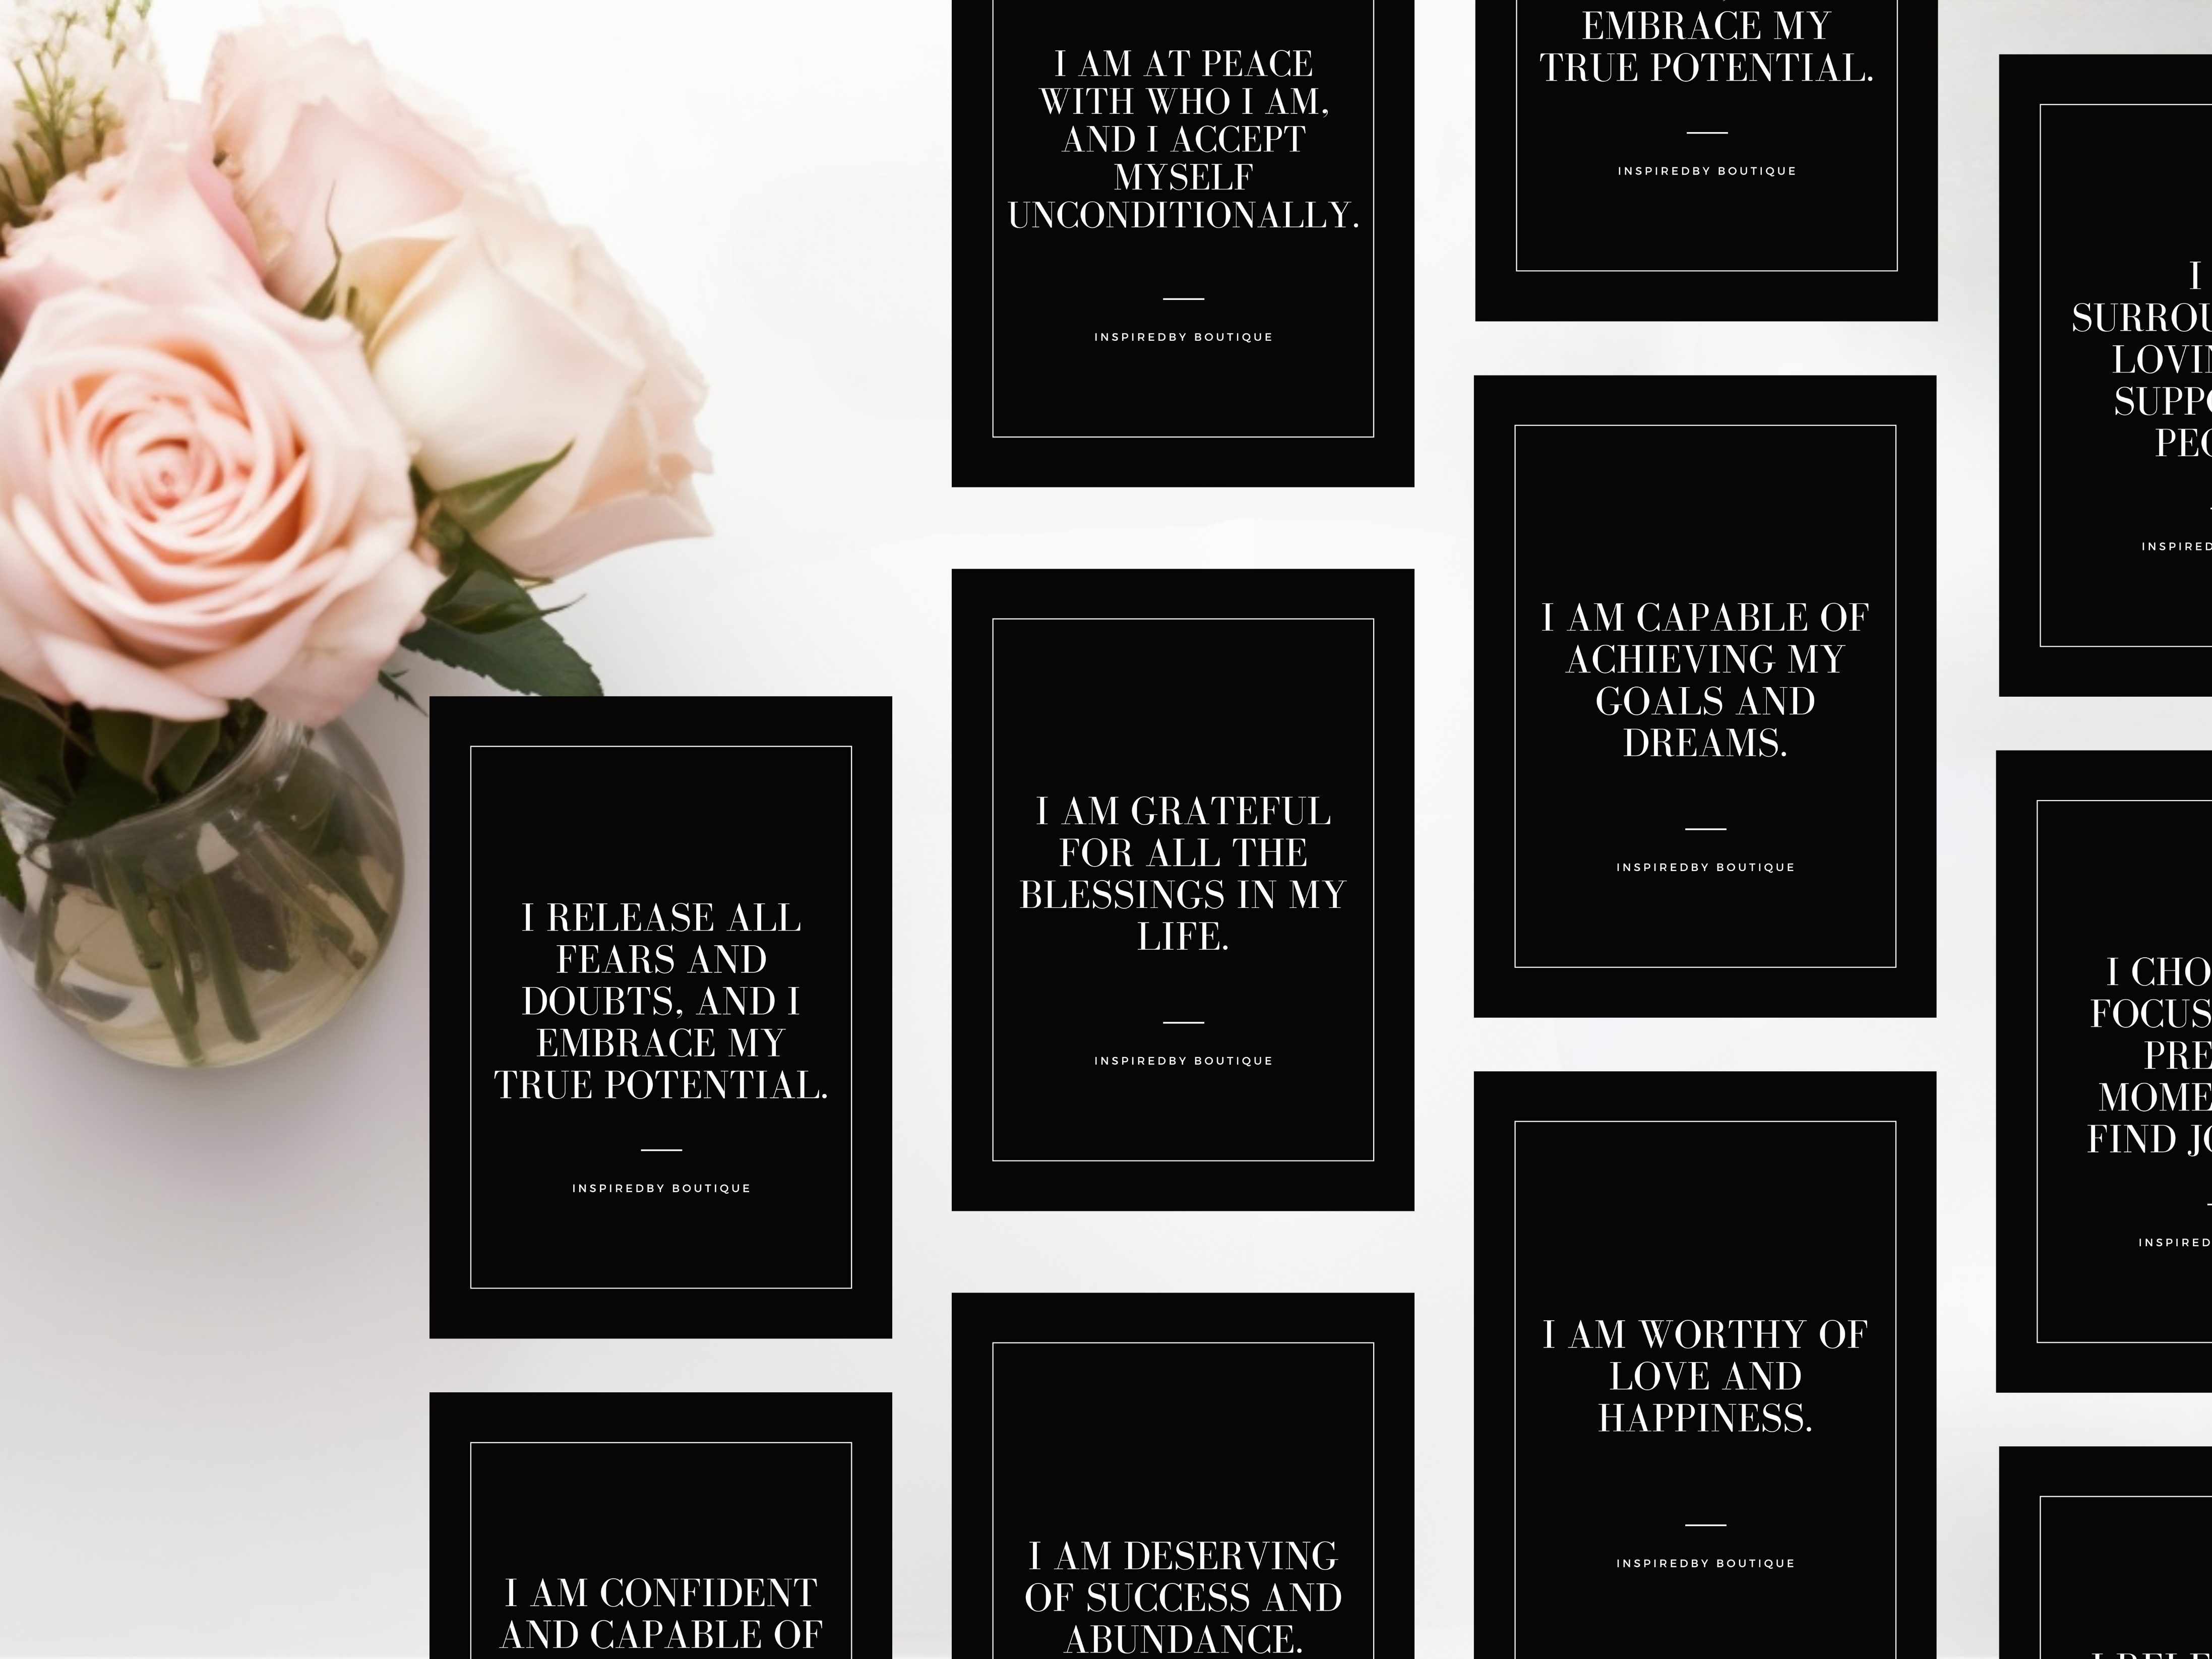 30 Day Affirmation Cards